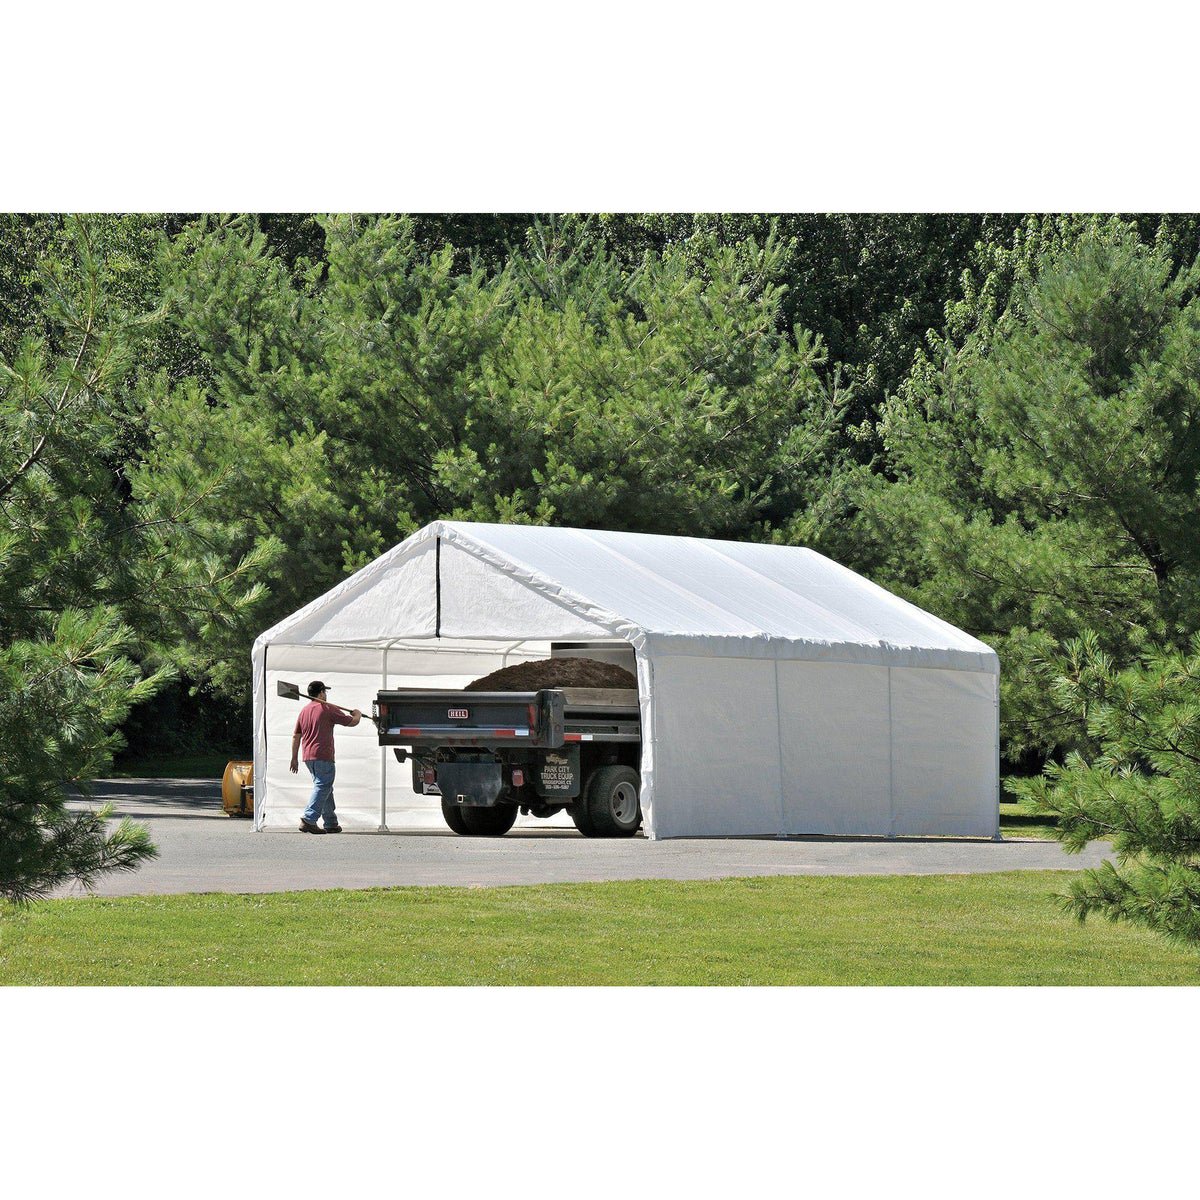 ShelterLogic SuperMax Fire Rated Canopy Enclosure Kit, 18  40 ft. (Frame and Canopy Sold Separately)